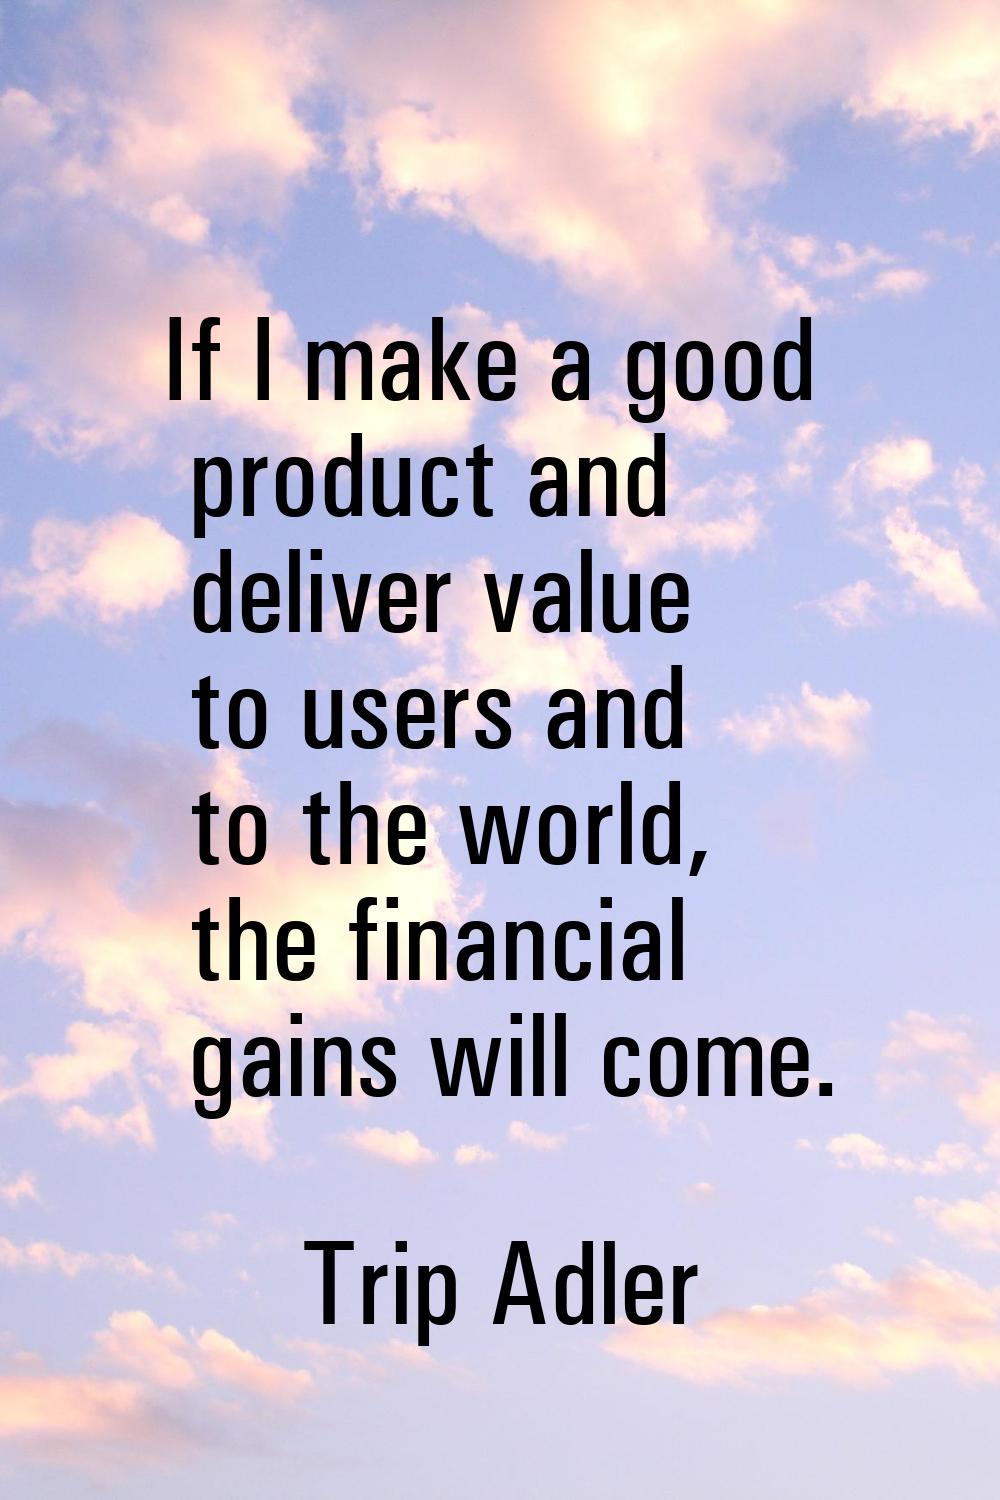 If I make a good product and deliver value to users and to the world, the financial gains will come